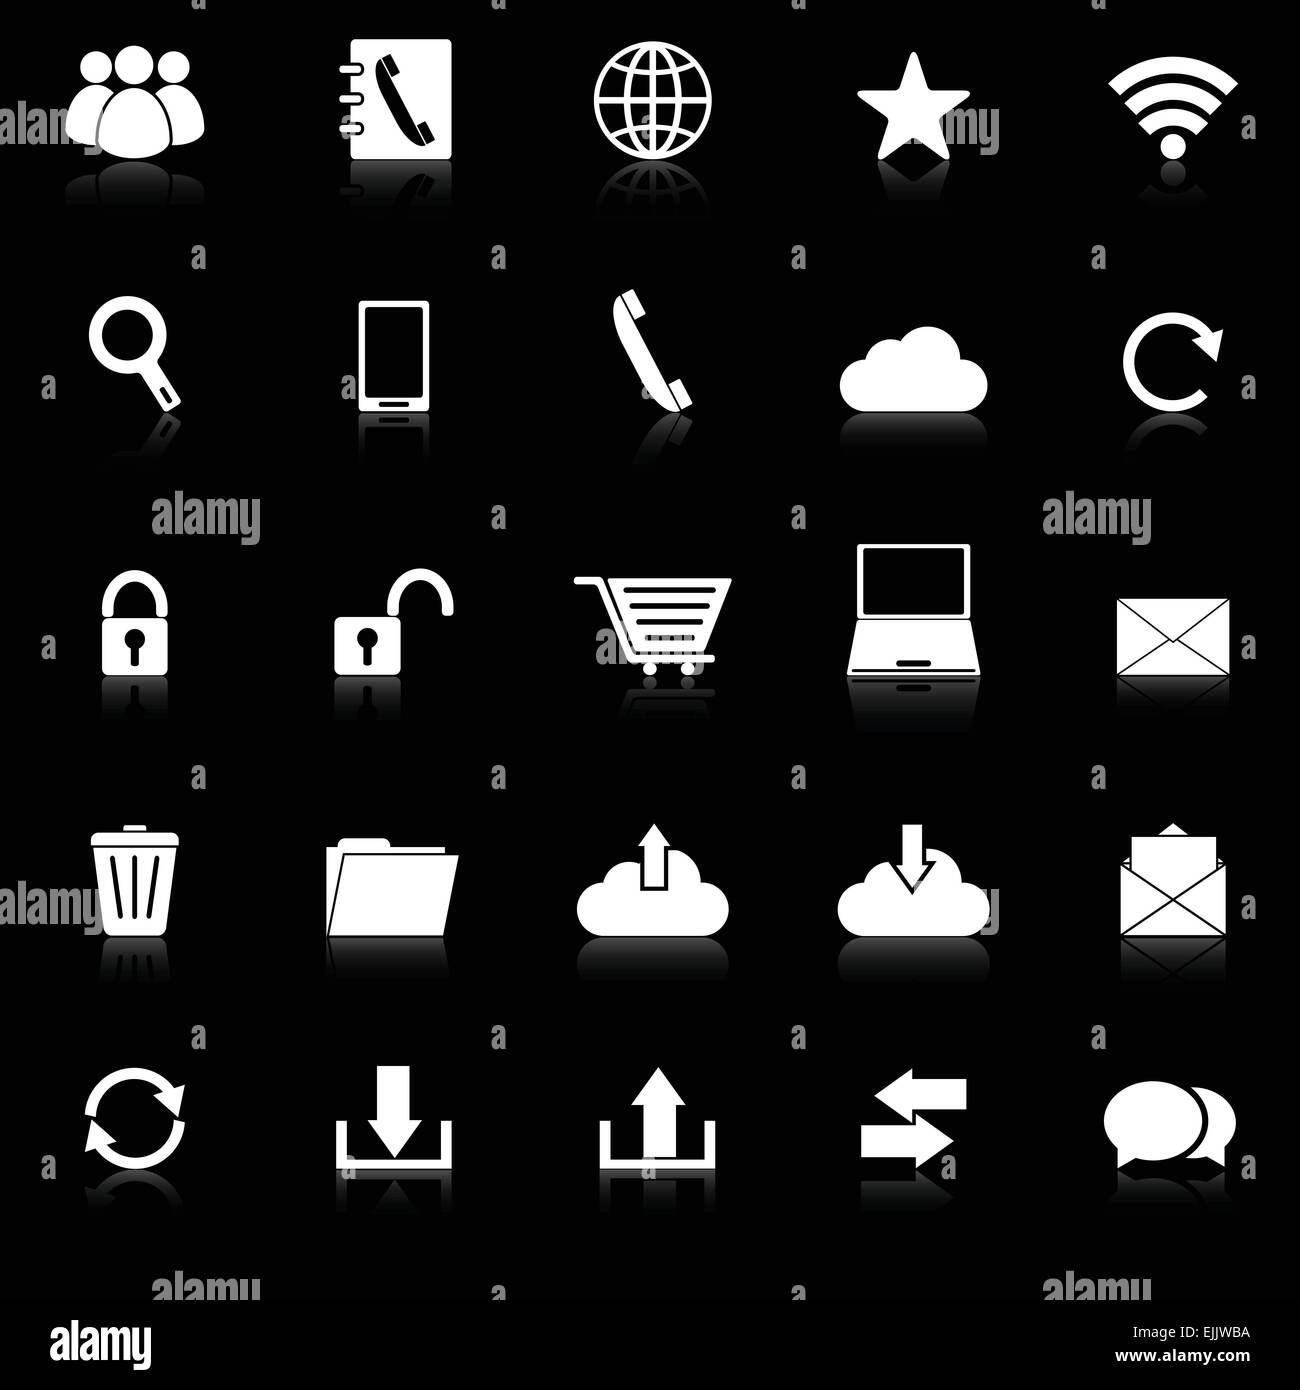 Communication icons with reflect on black background, stock vector Stock Vector